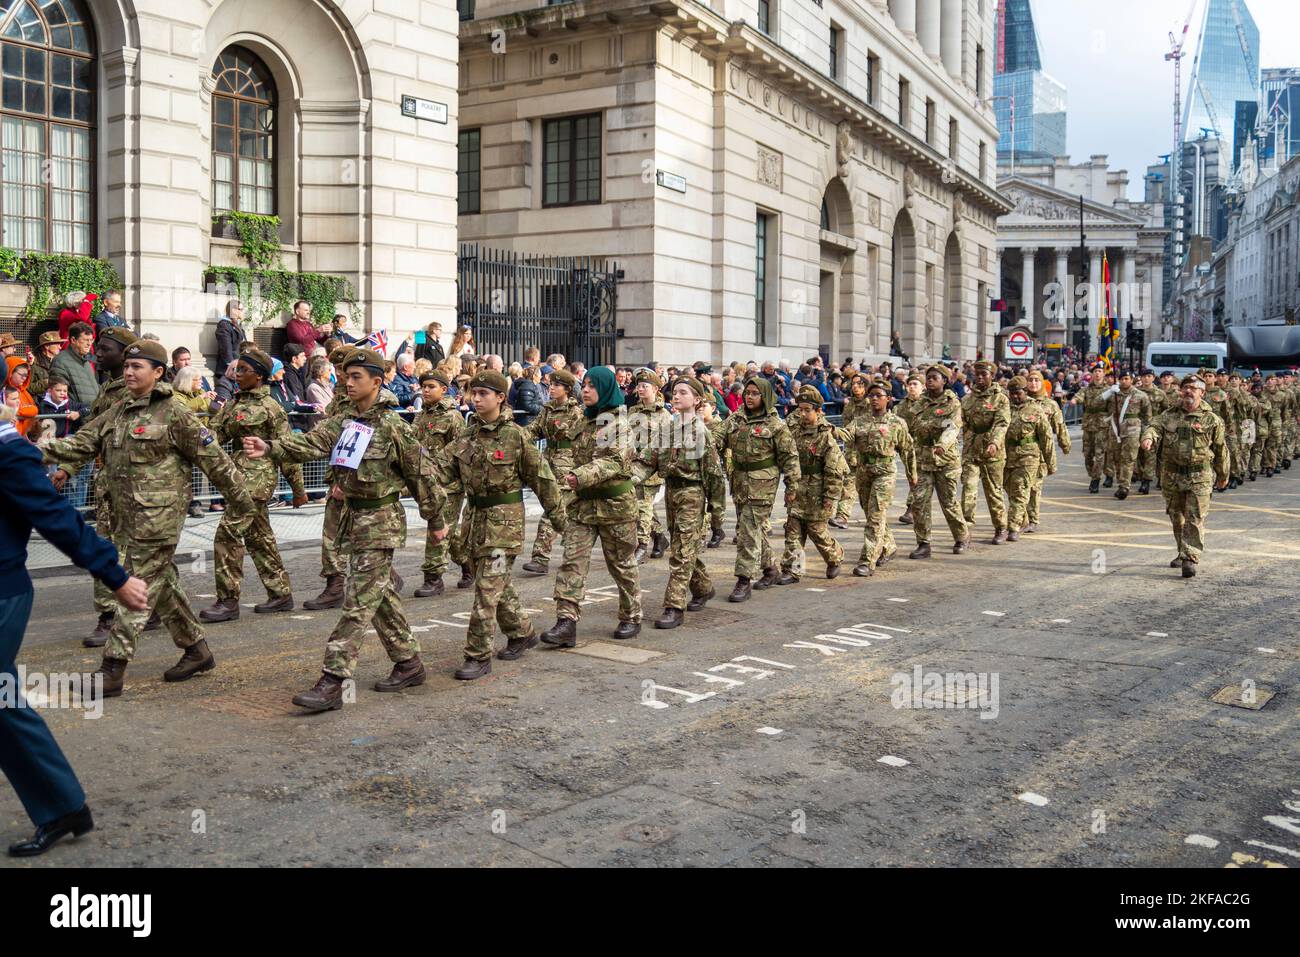 MOSSBOURNE HONOURABLE ARTILLERY COMPANY COMBINED CADET FORCE at the Lord Mayor's Show parade in the City of London, UK Stock Photo